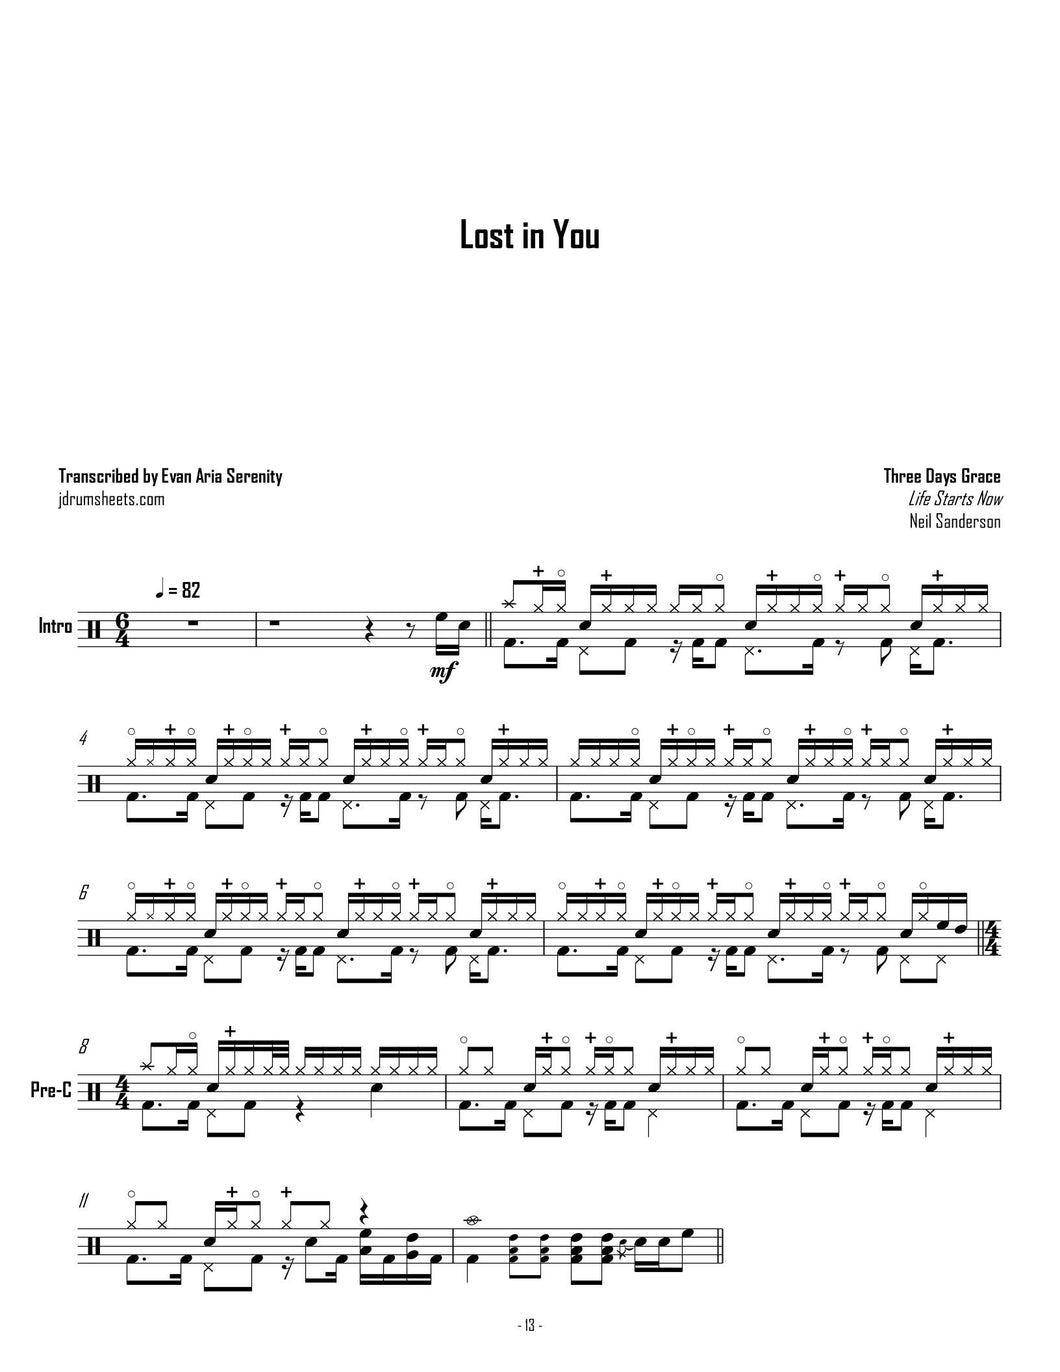 Lost in You - Three Days Grace - Full Drum Transcription / Drum Sheet Music - Jaslow Drum Sheets